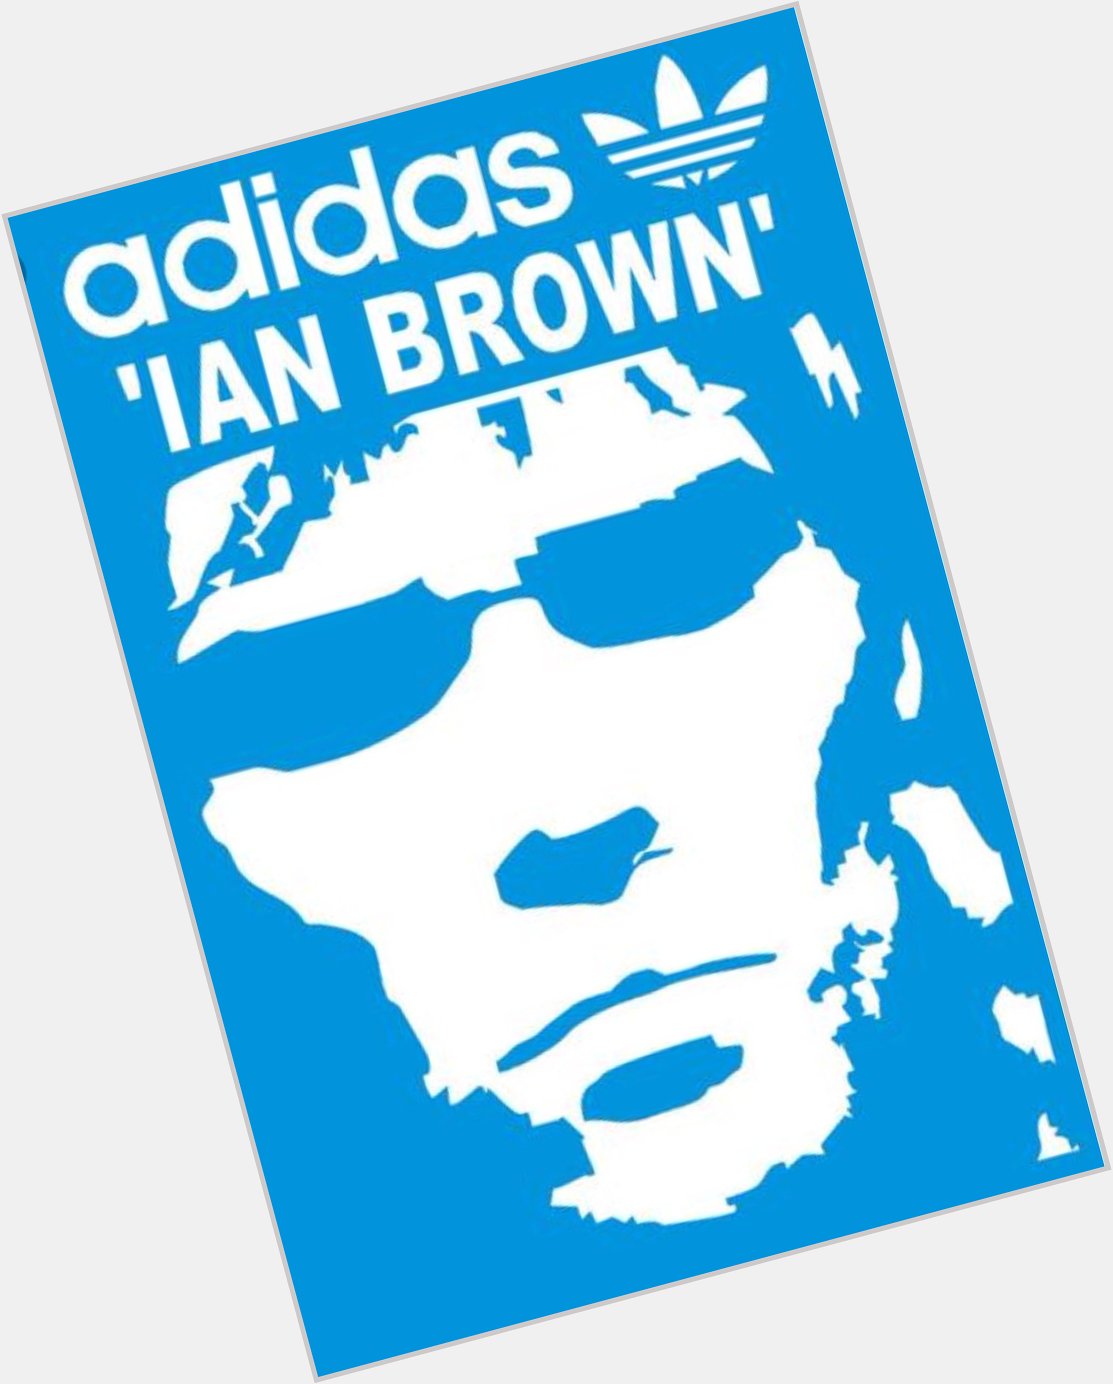 Happy bday to Ian Brown 